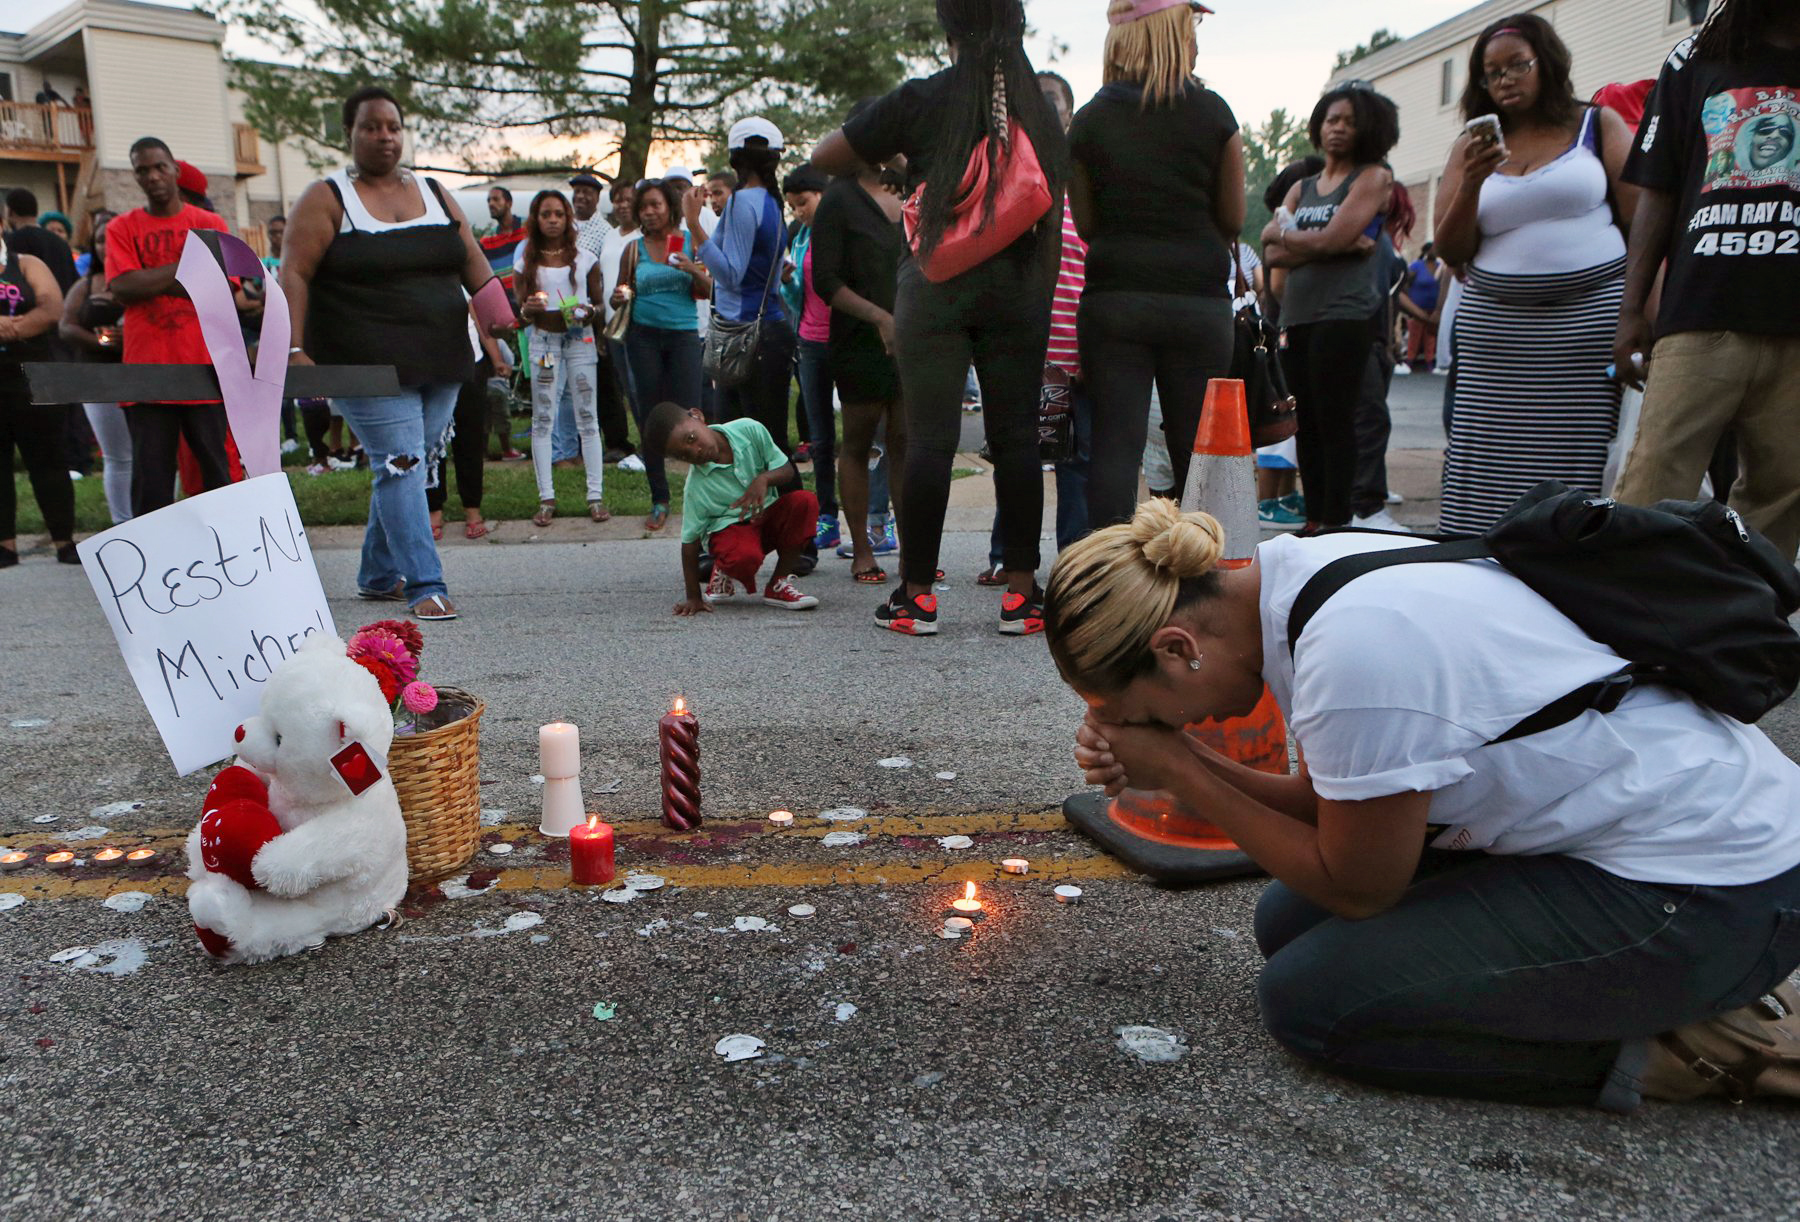 PHOTO: Meghan O'Donnell, 29, from St. Louis, prays at the spot where Michael Brown was killed, Aug. 10, 2014, in Ferguson, Mo.